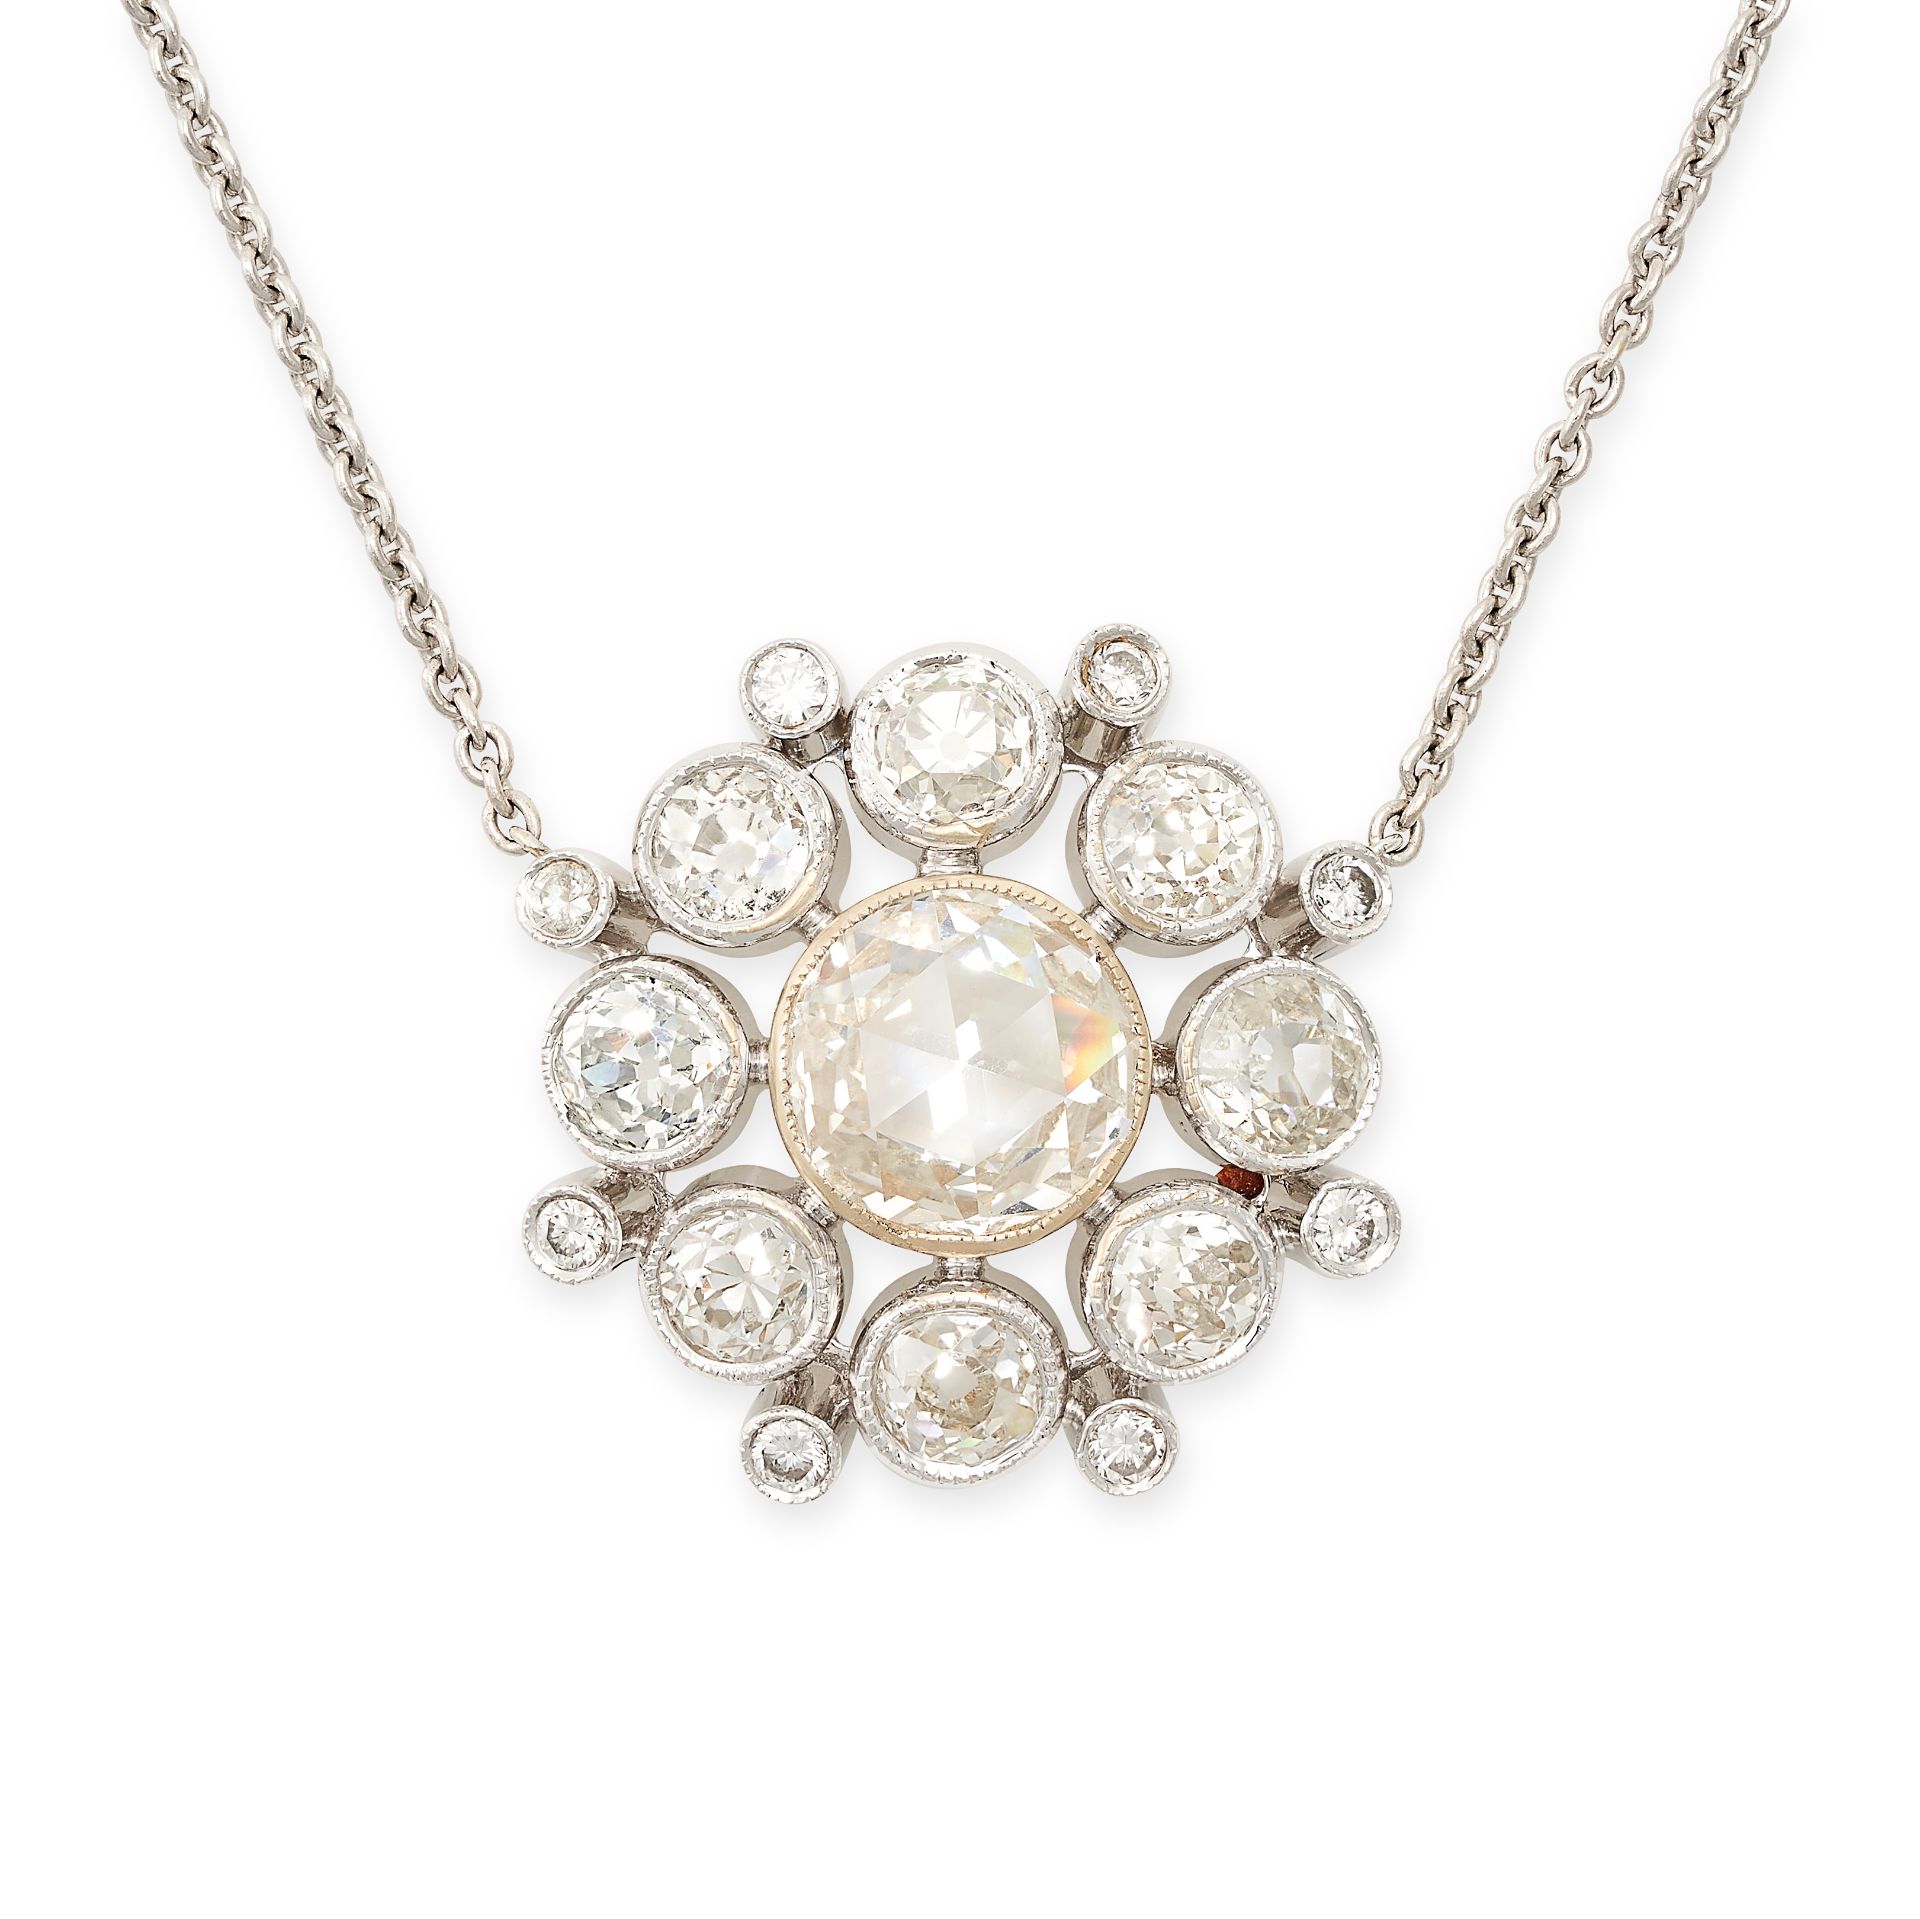 A DIAMOND PENDANT NECKLACE in 18ct white gold, the pendant set with a central rose cut diamond of